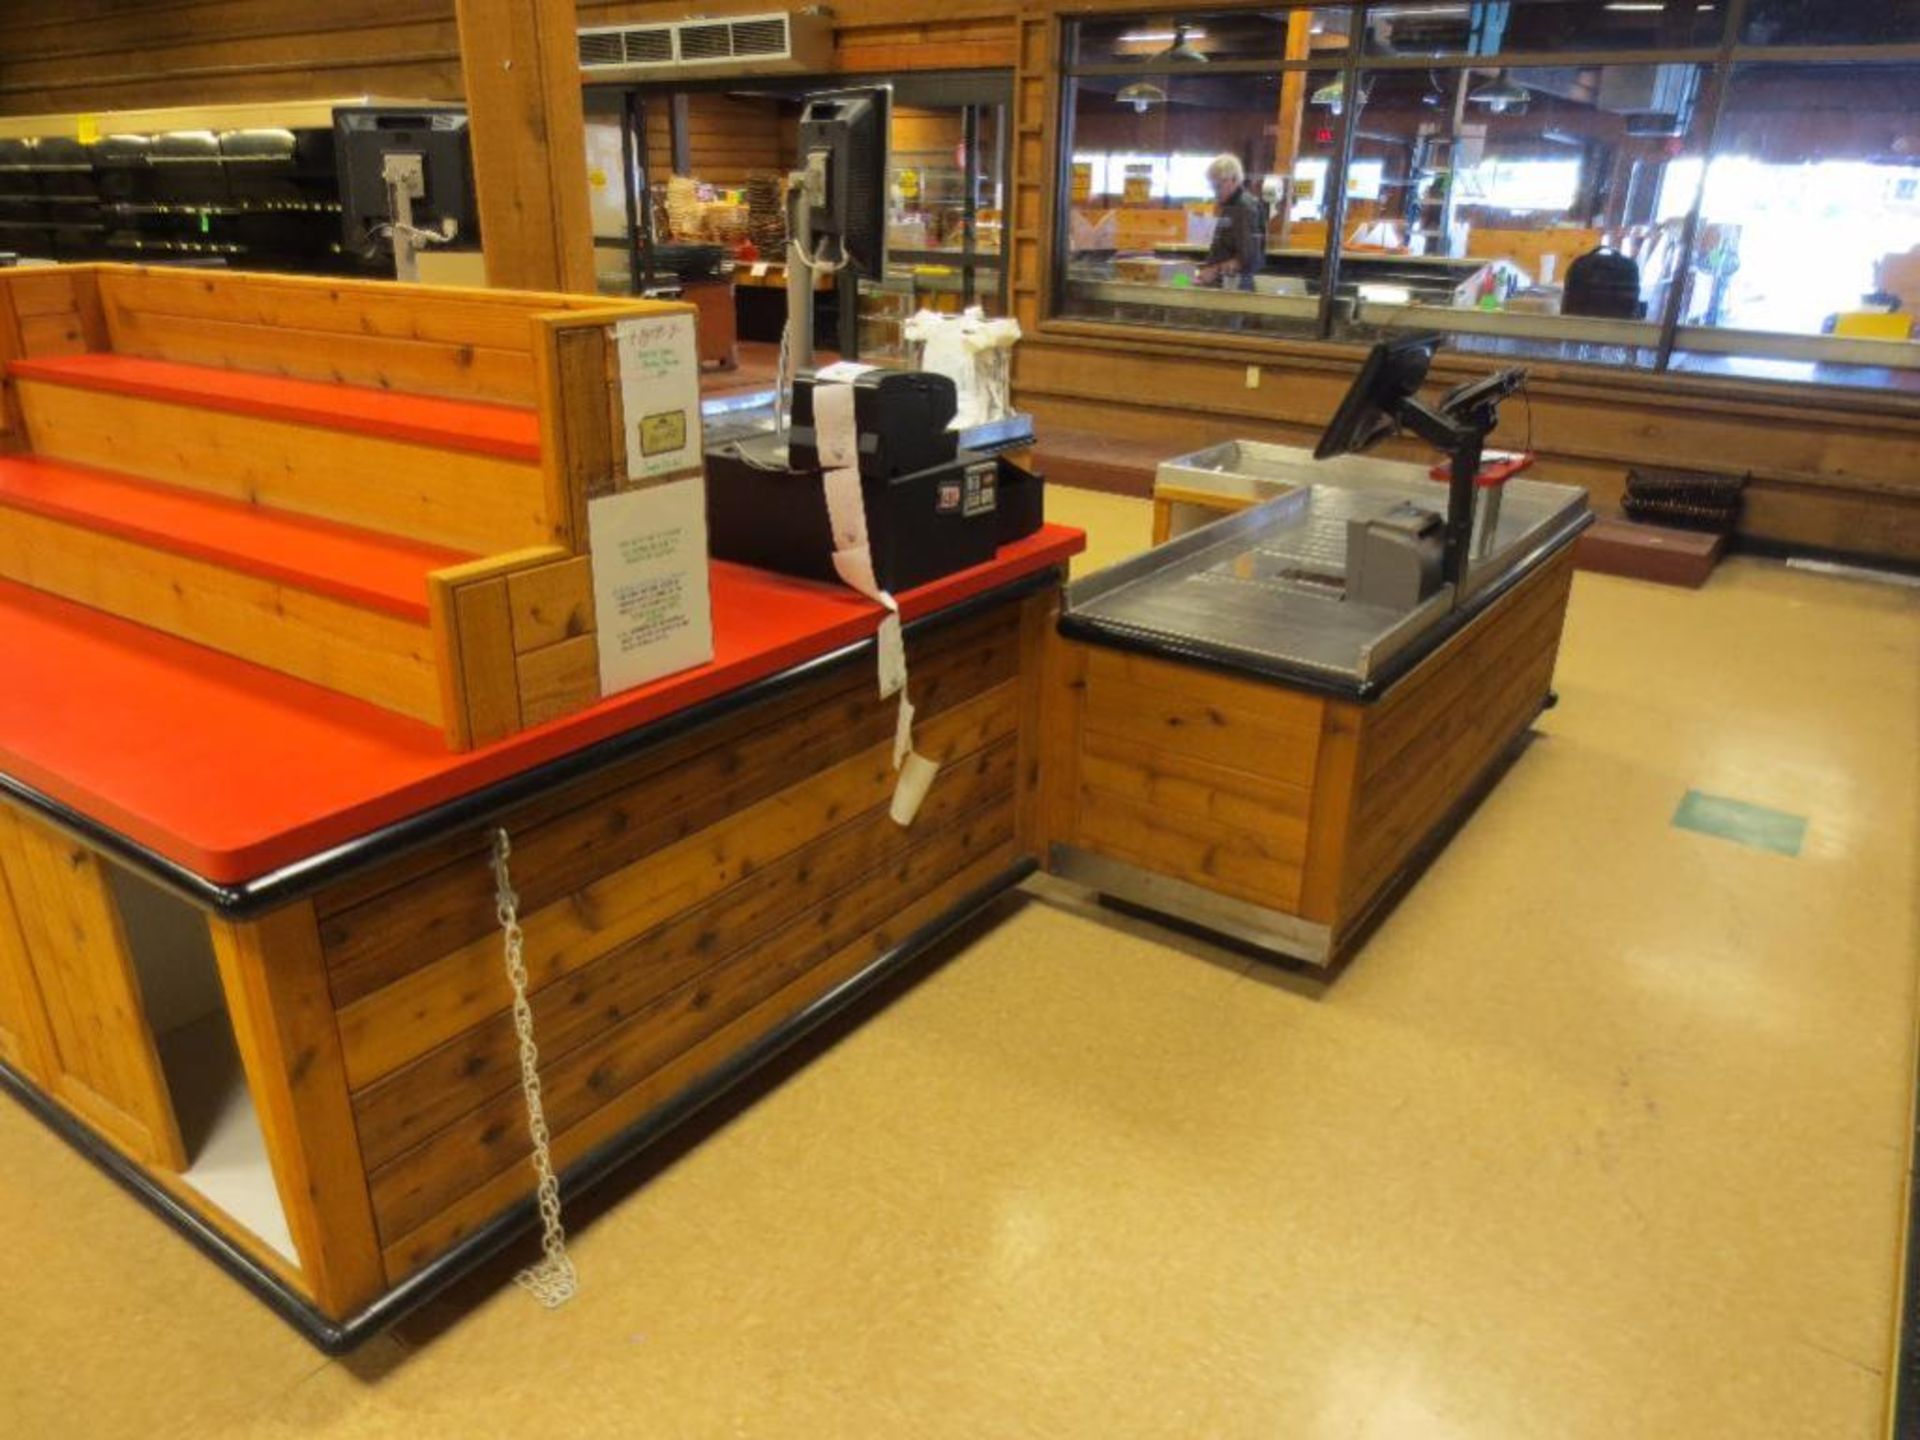 Large Island Point of Sale Checkout with Registers, Monitors, Scanners, Card Readers and Display - Image 6 of 7